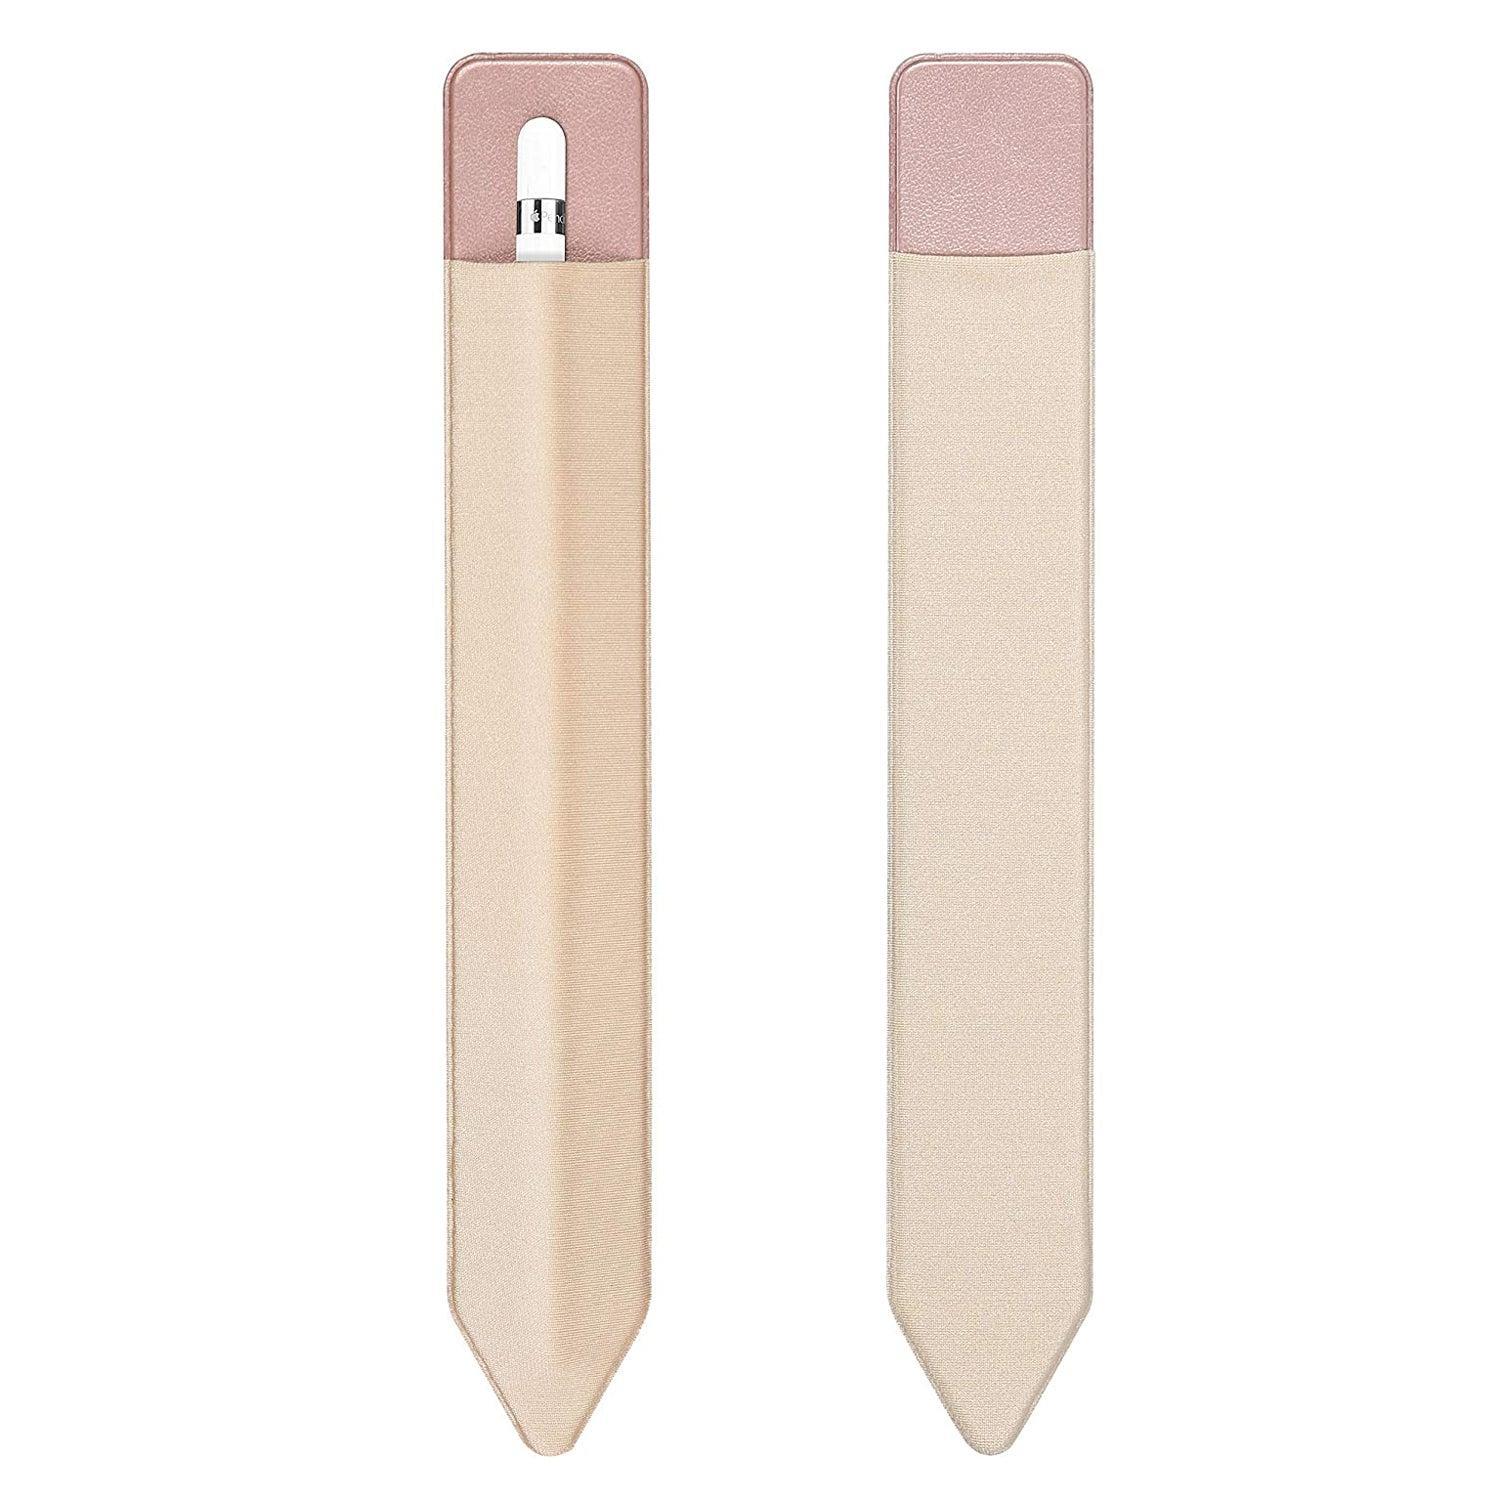 Pencil Holder Adhesive Sticker for Apple Pencil 1st and 2nd Gen Rosegold